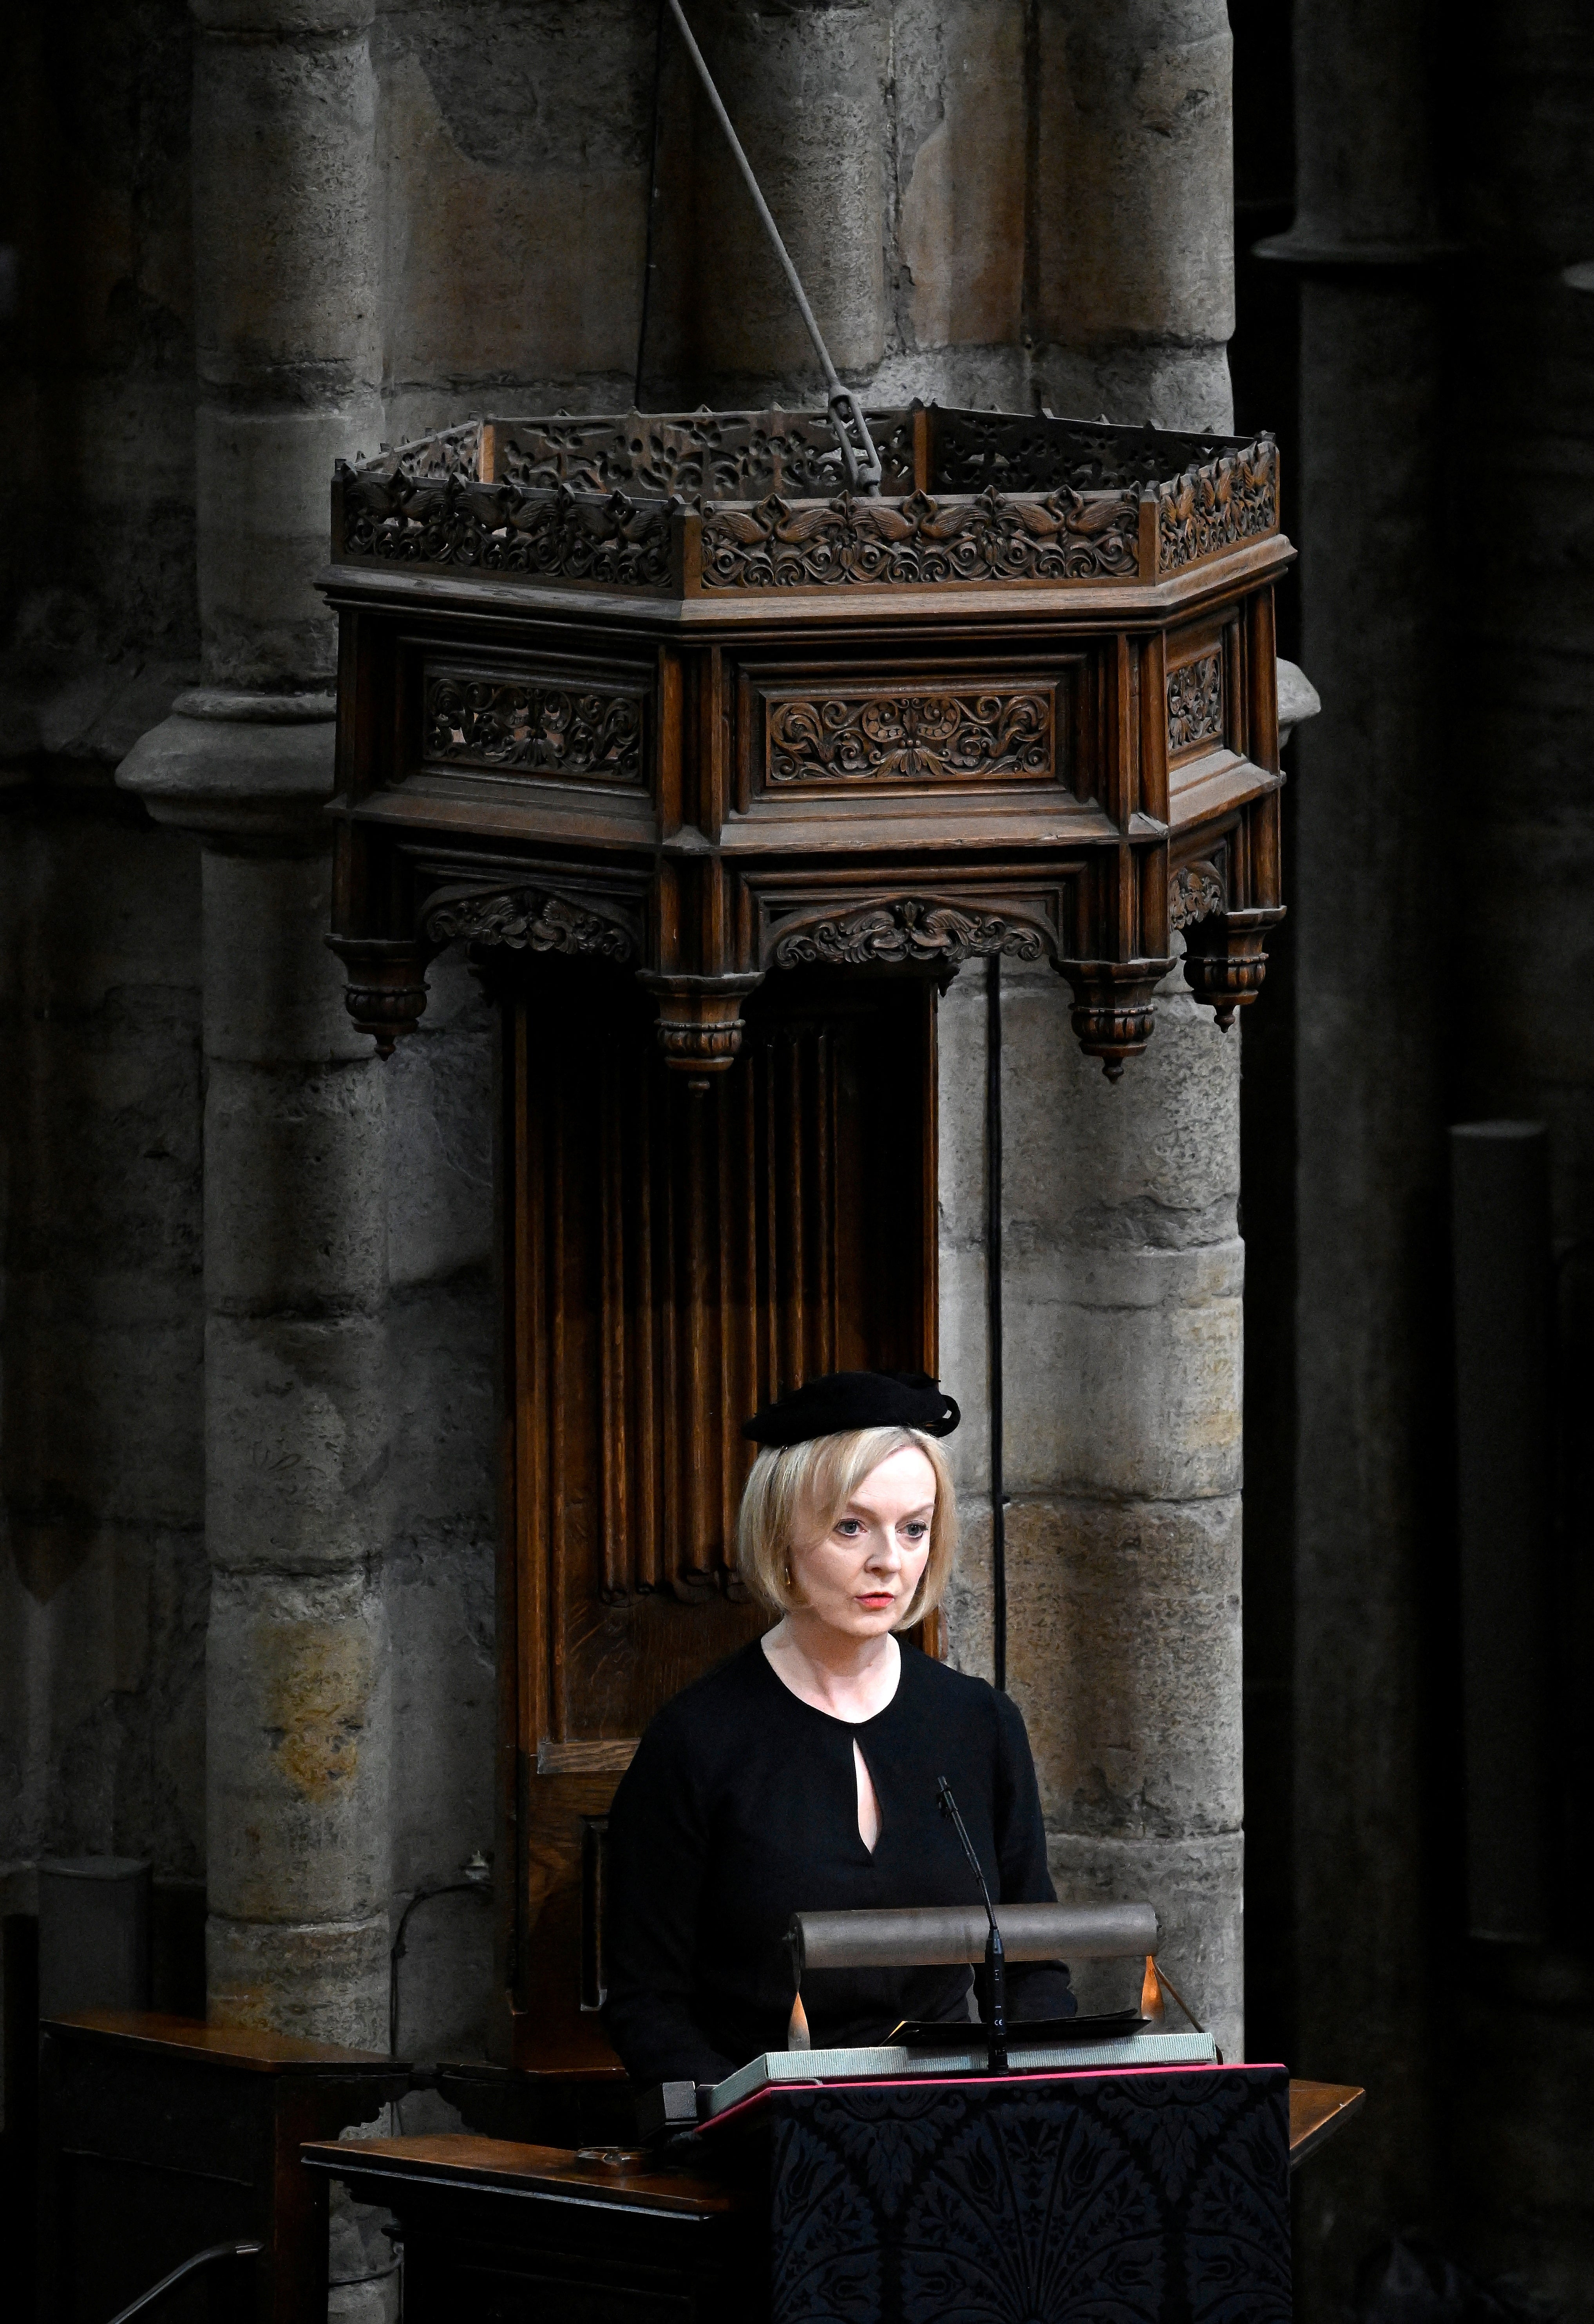 Liz Truss gives the second lesson at the funeral